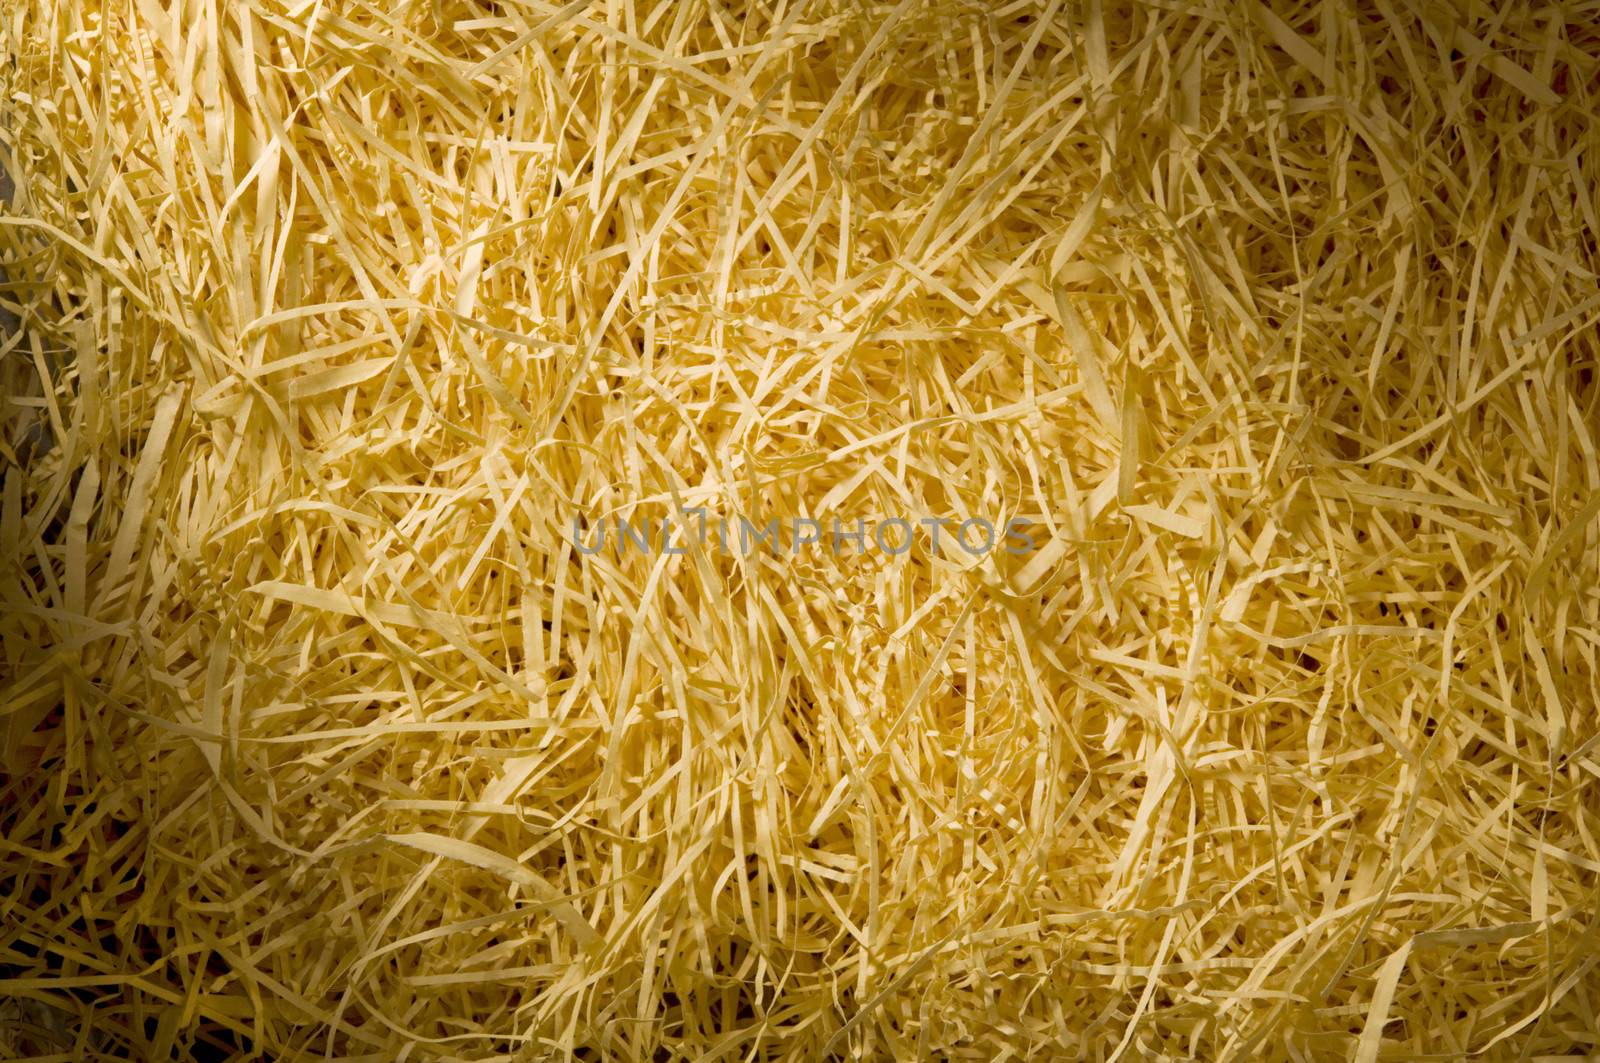 Yellow packing material background texture lit diagonally